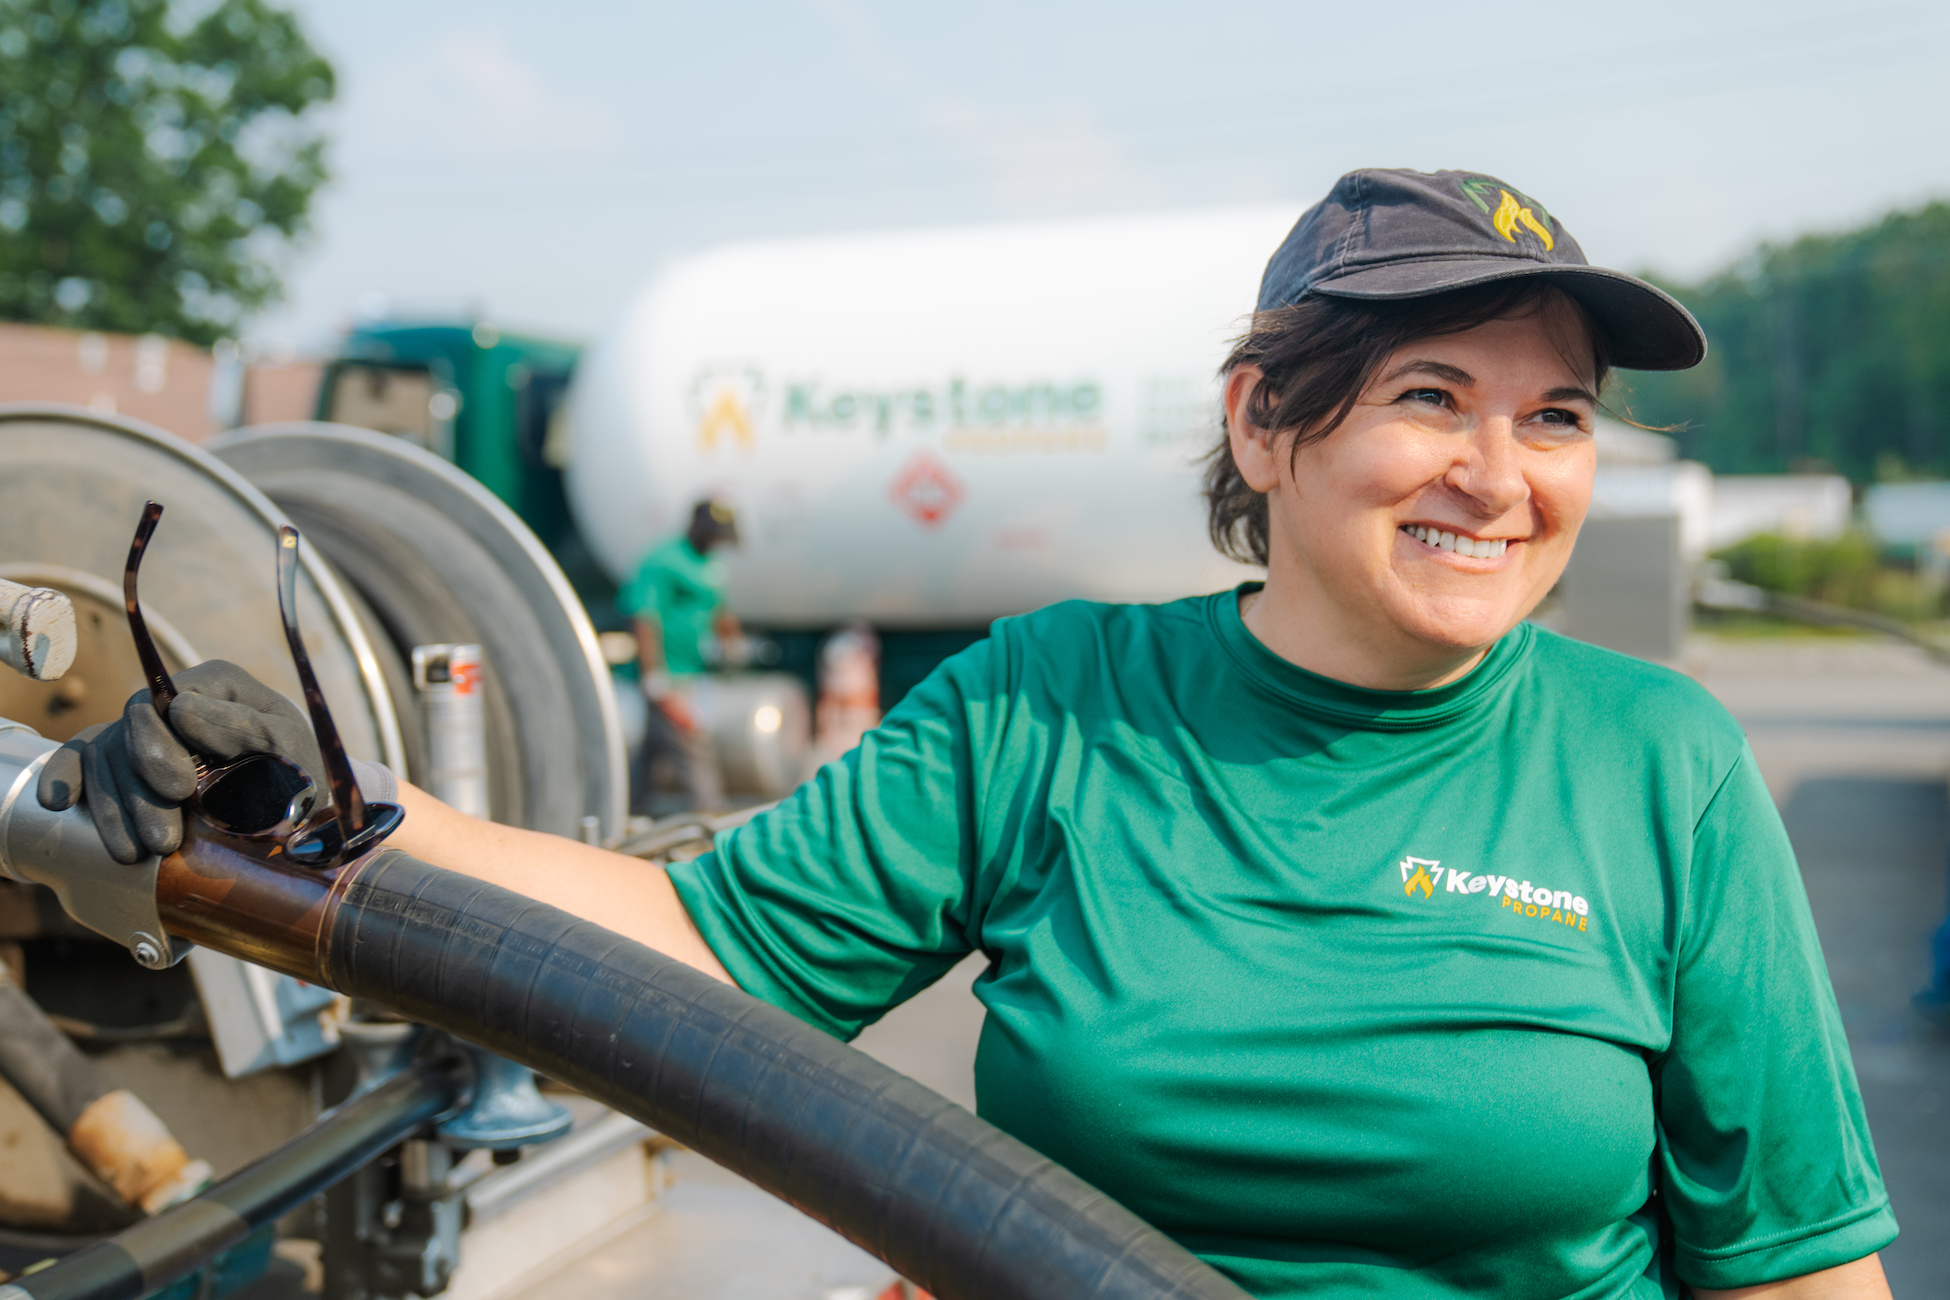 Keystone Propane technician smiling while gathering hose from tanker. (custom photography)